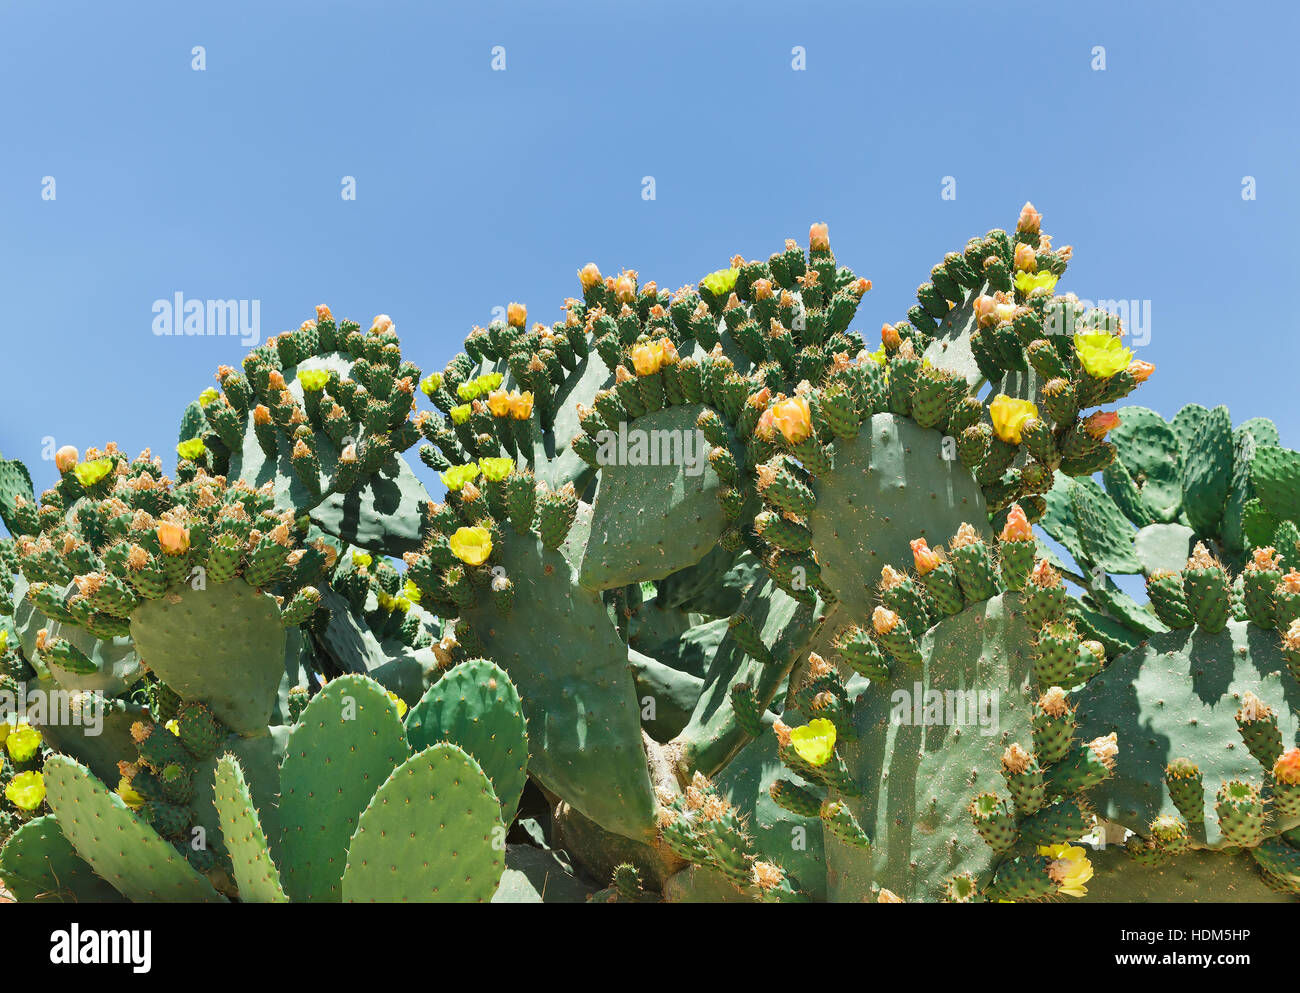 Blooming cactus on a background of blue sky Stock Photo